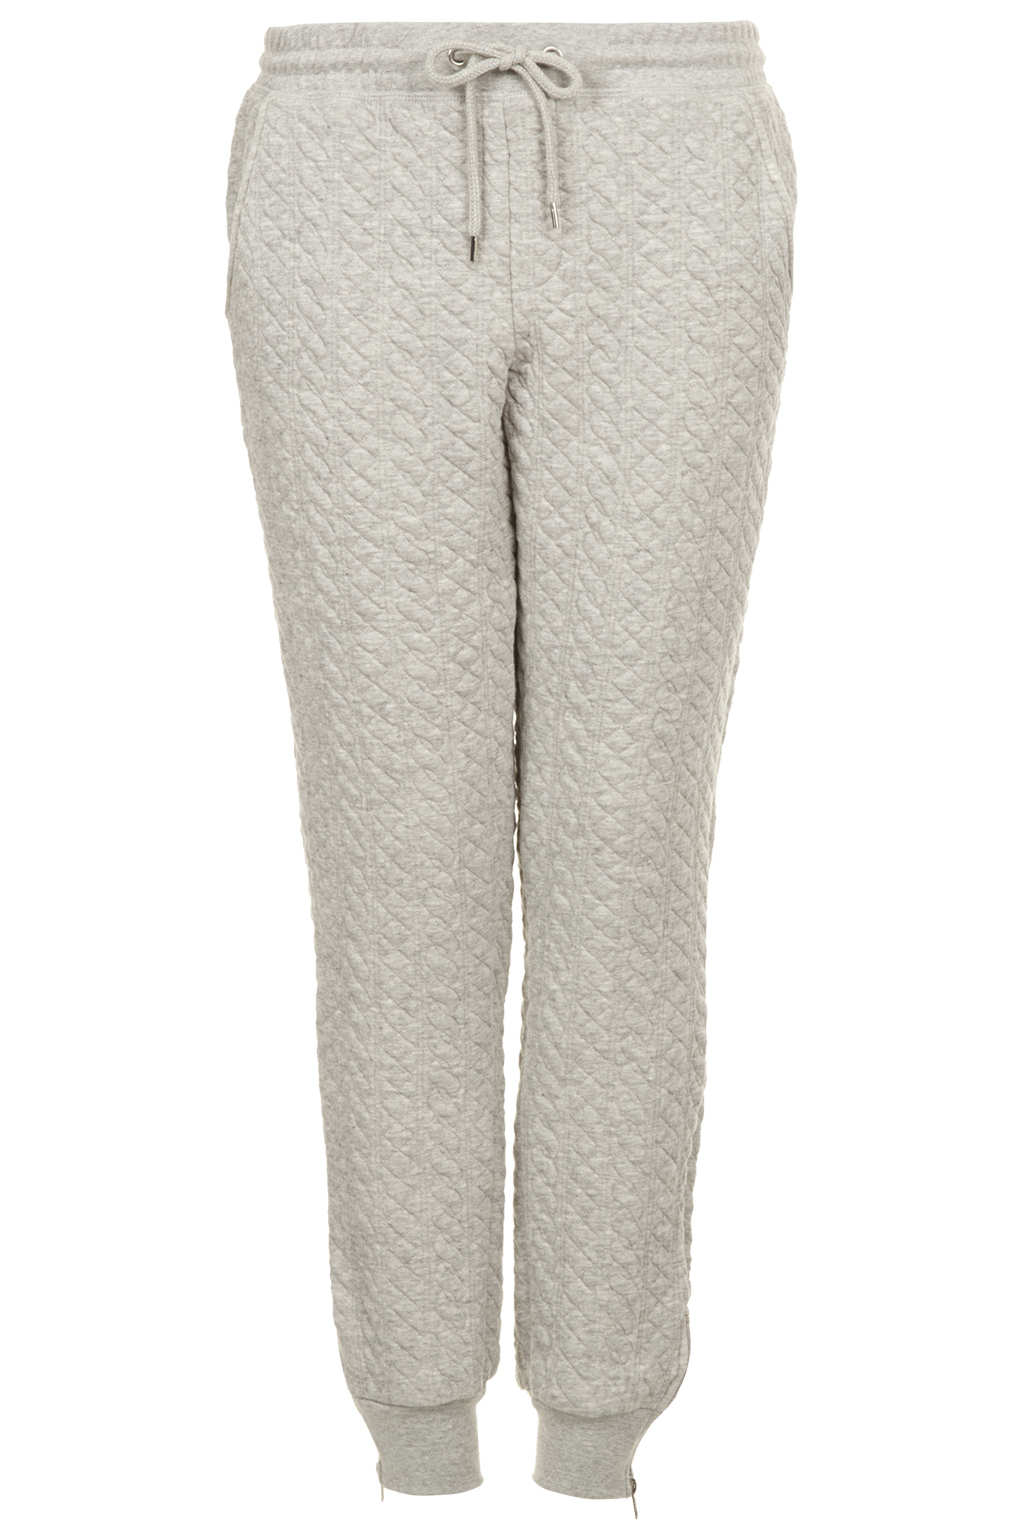 Lyst - Topshop Cable Knit Quilted Joggers in Gray